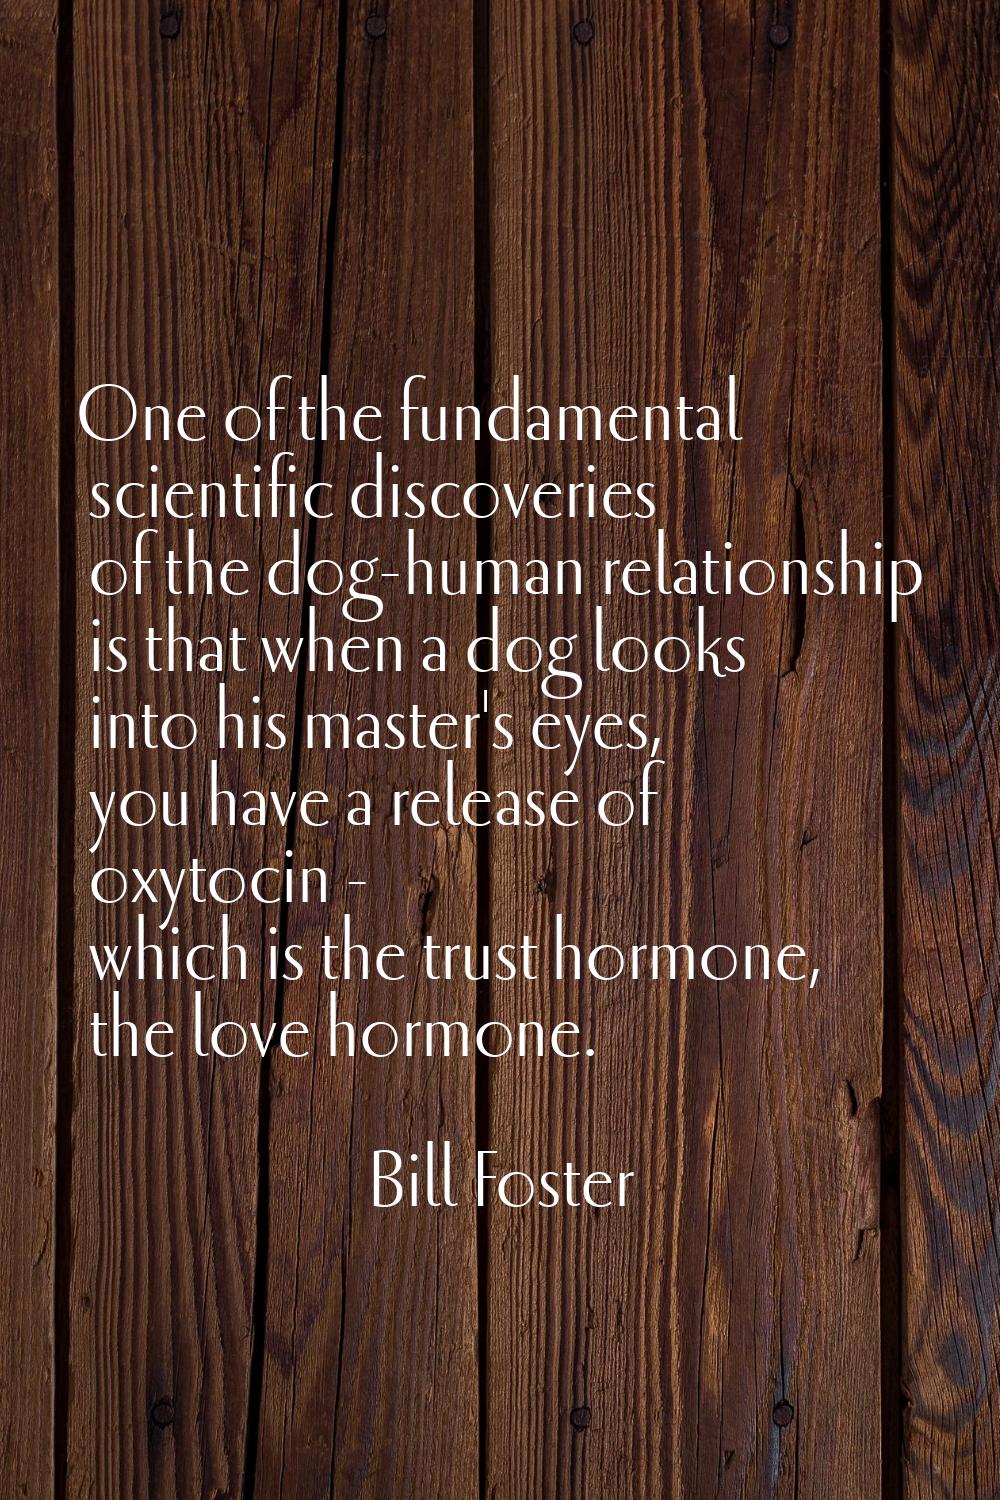 One of the fundamental scientific discoveries of the dog-human relationship is that when a dog look